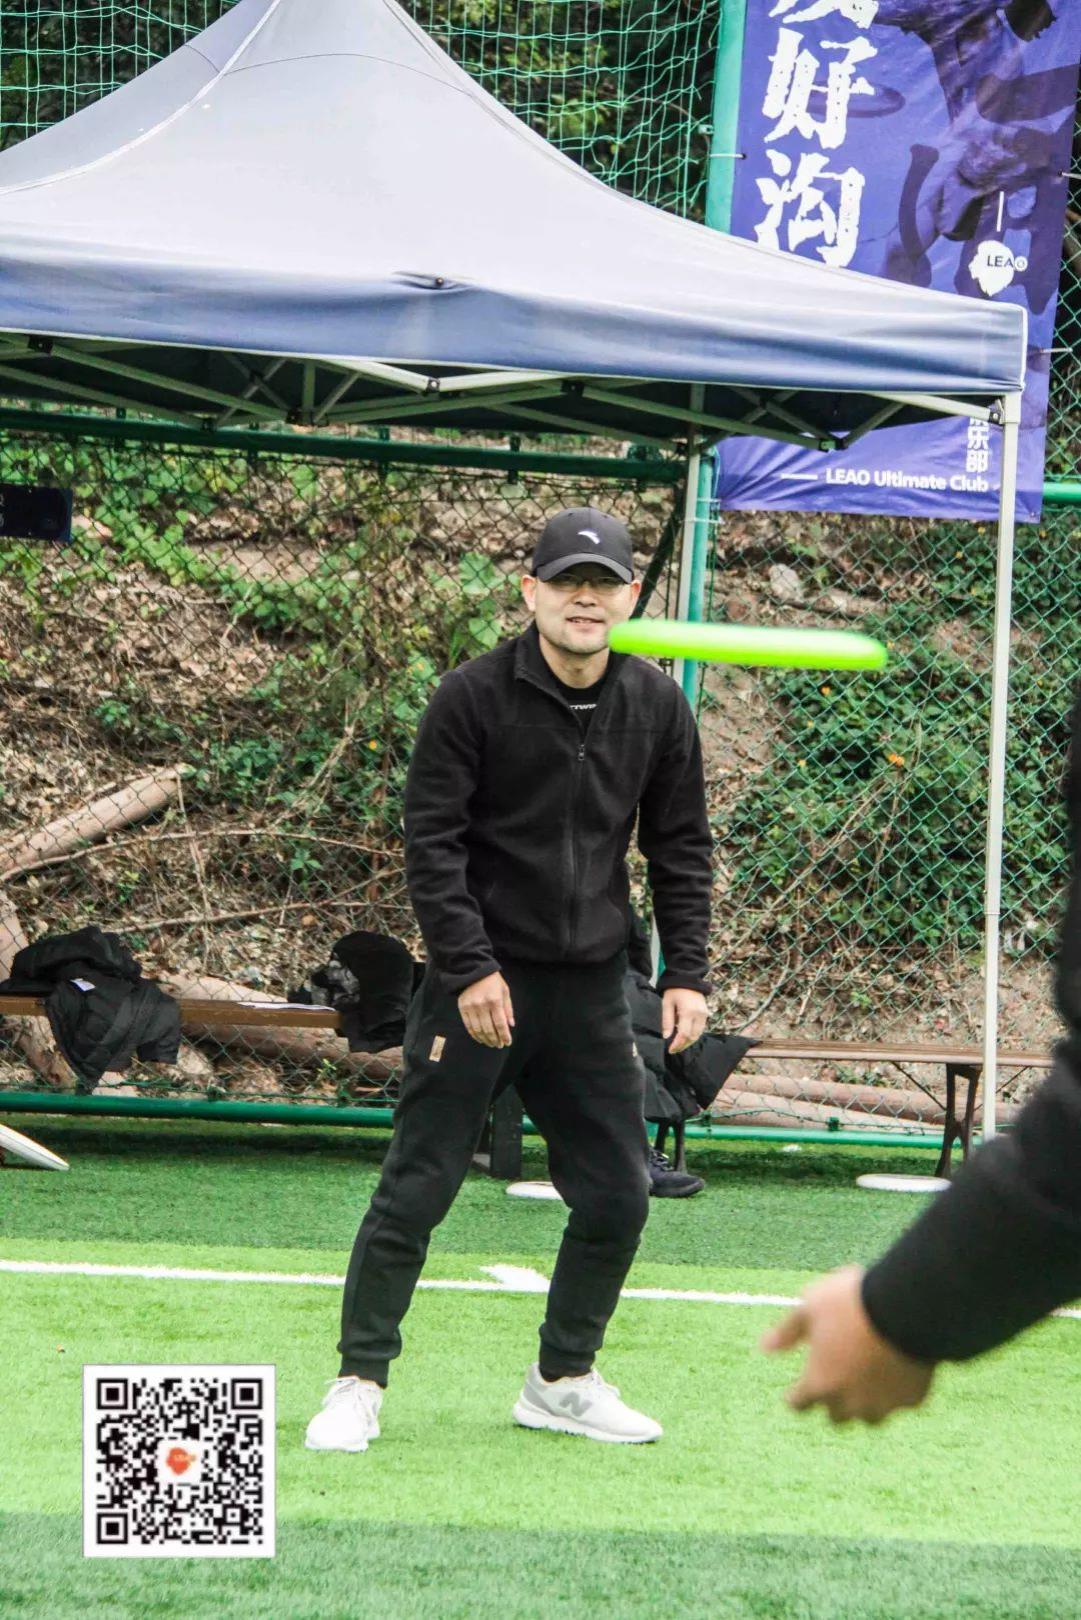 http://www.leaoultimate.com/wp-content/uploads/2019/04/2019041808211262467231688.jpg